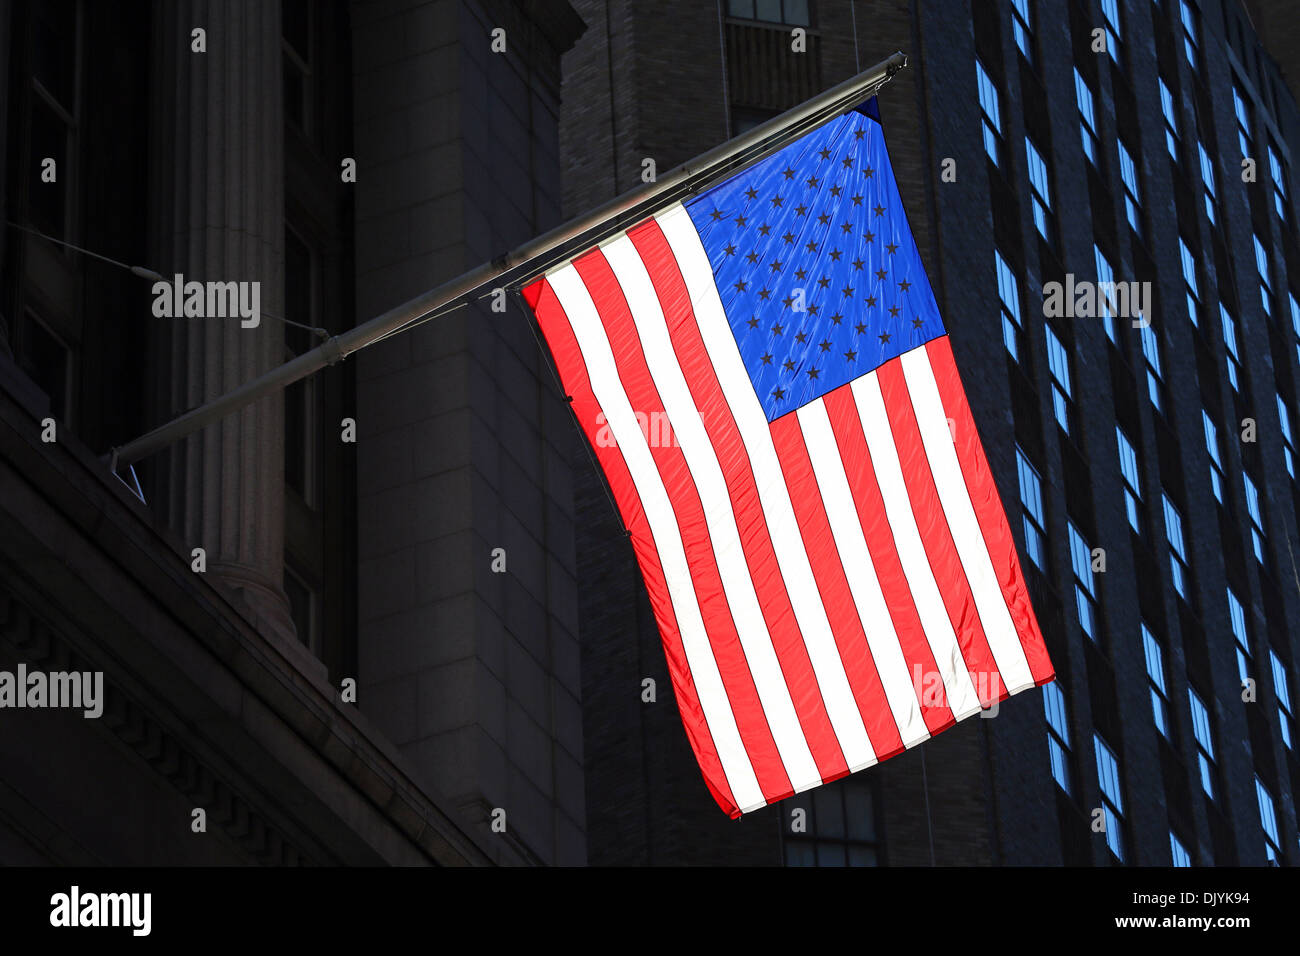 Red, white and blue Stars and Stripes American flag, New York. America Stock Photo